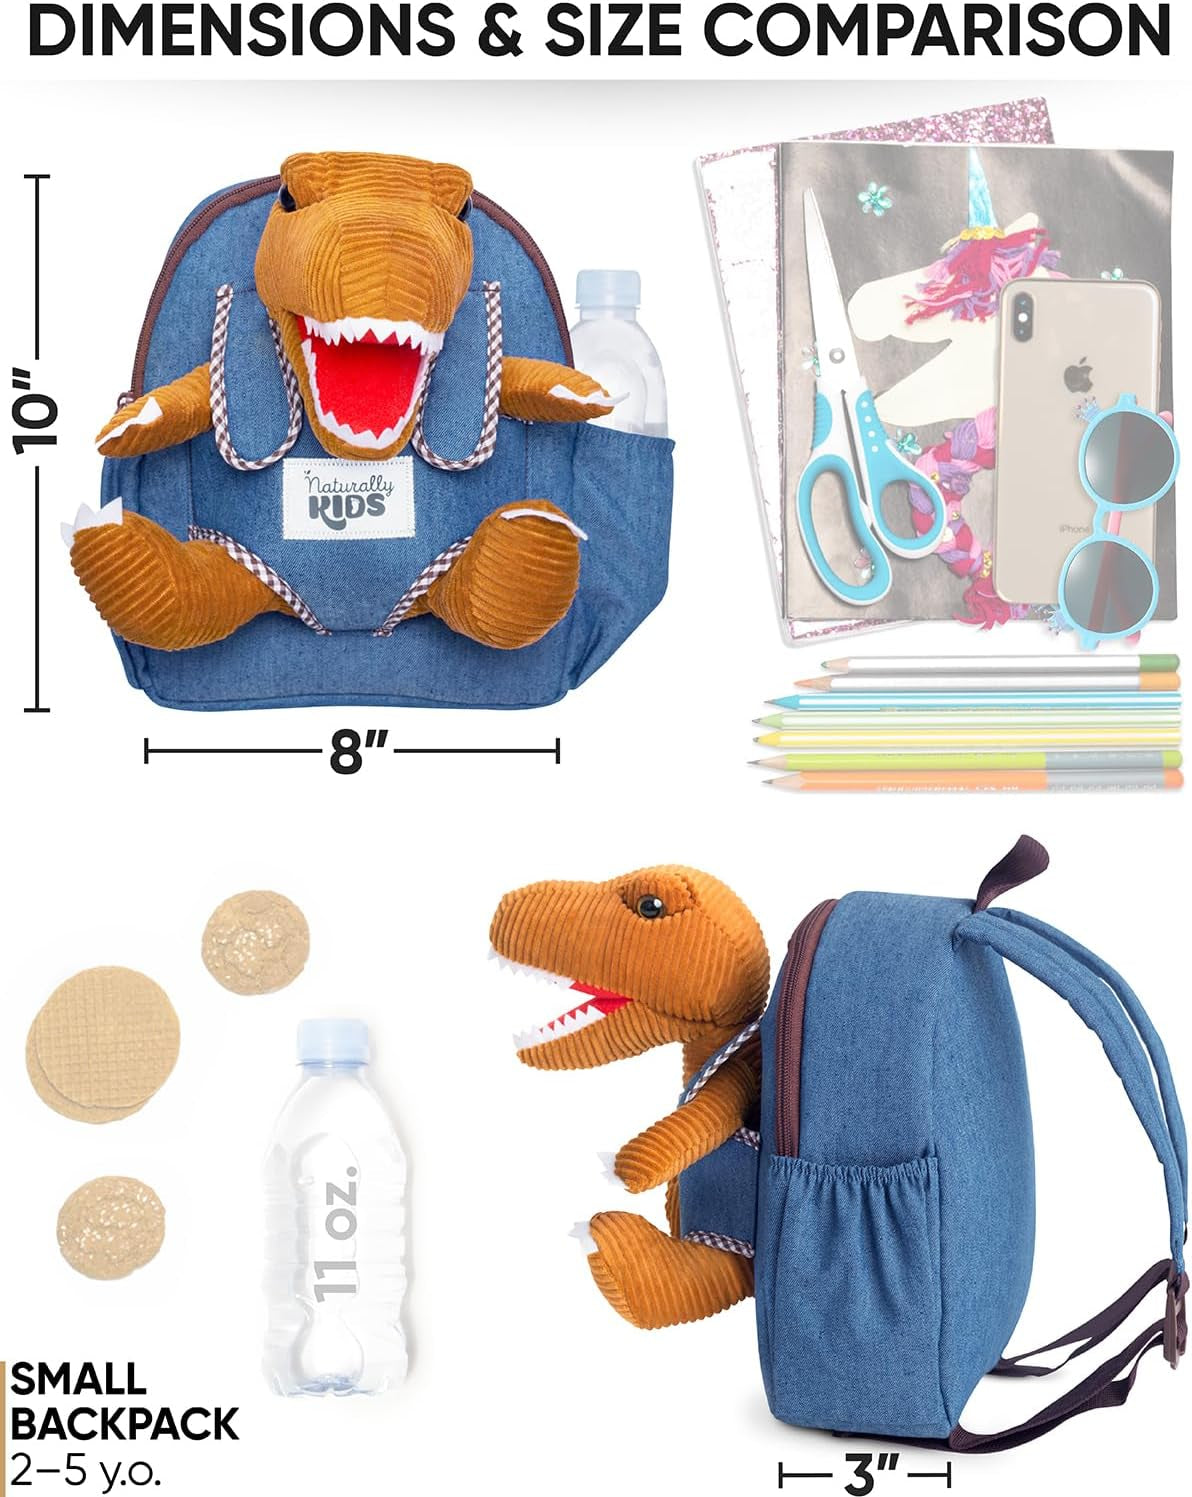 Dinosaur Rolling Backpack Toddler Suitcase, Kids Luggage for Girls, Kids Suitcase with Wheels